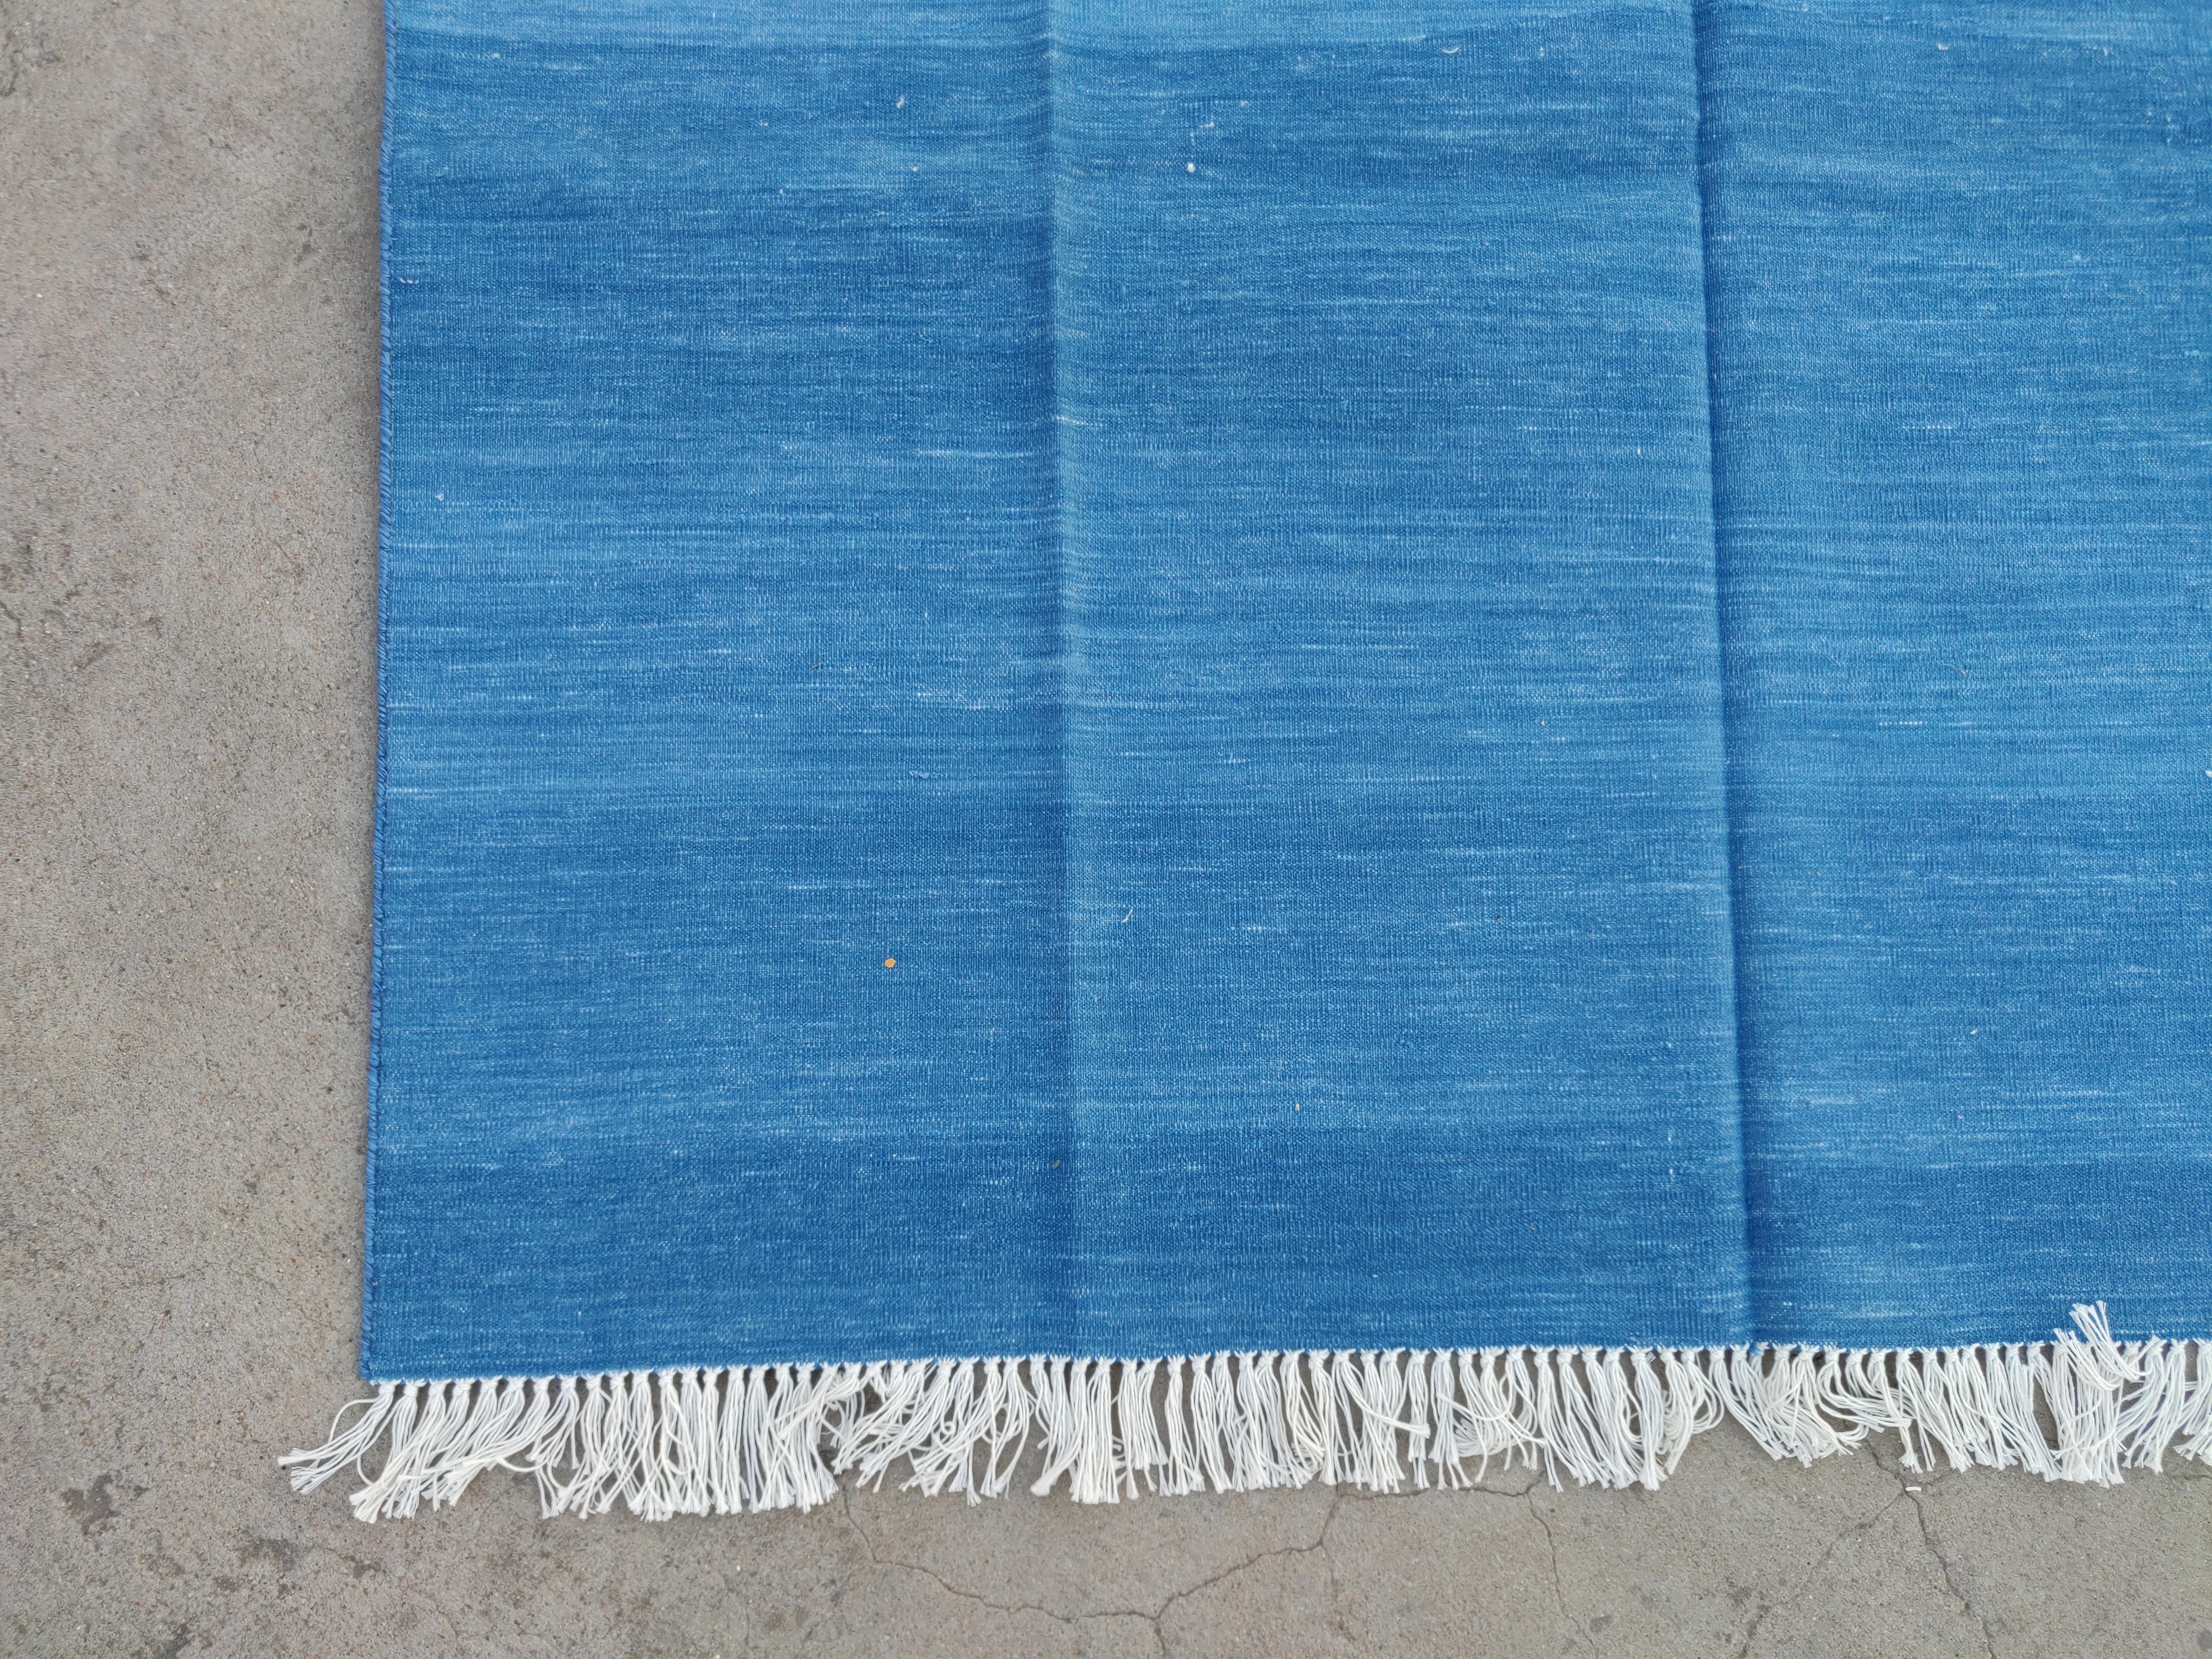 Handmade Cotton Area Flat Weave Rug, 5x8 Blue And White Striped Indian Dhurrie For Sale 2